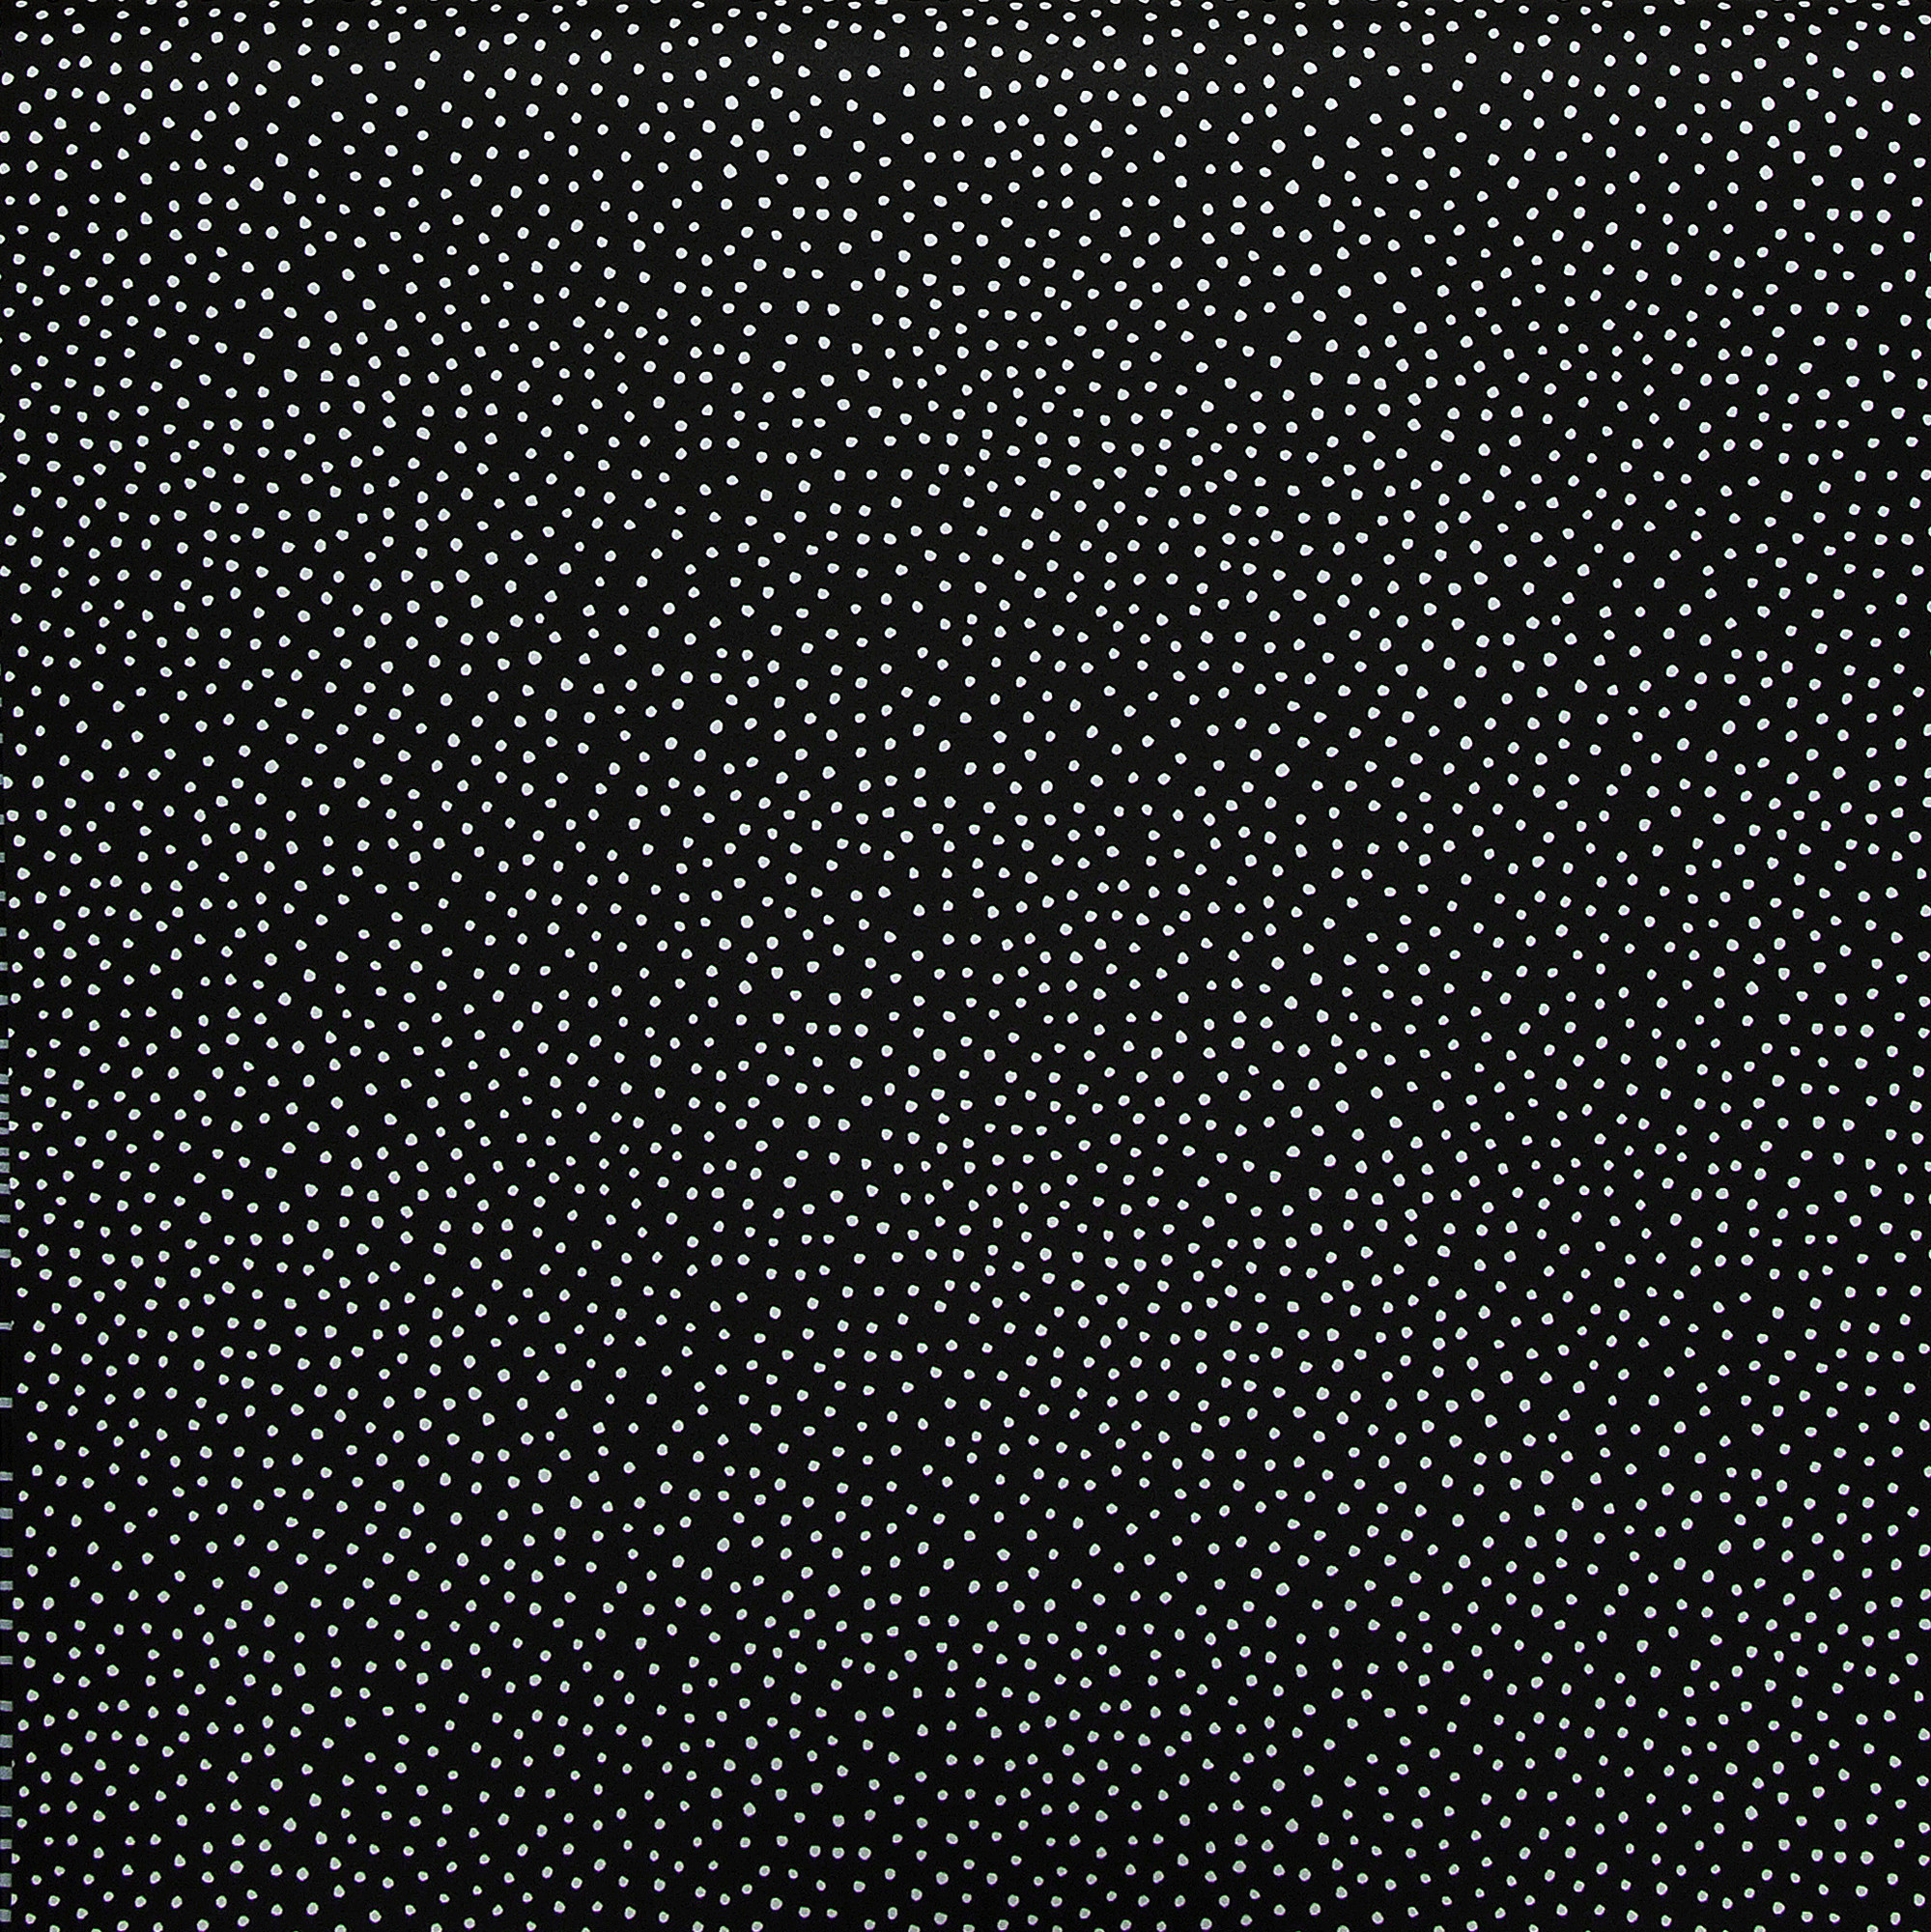 Small white dots on black wallpaper add some interest and texture. Really  cool wallpaper by